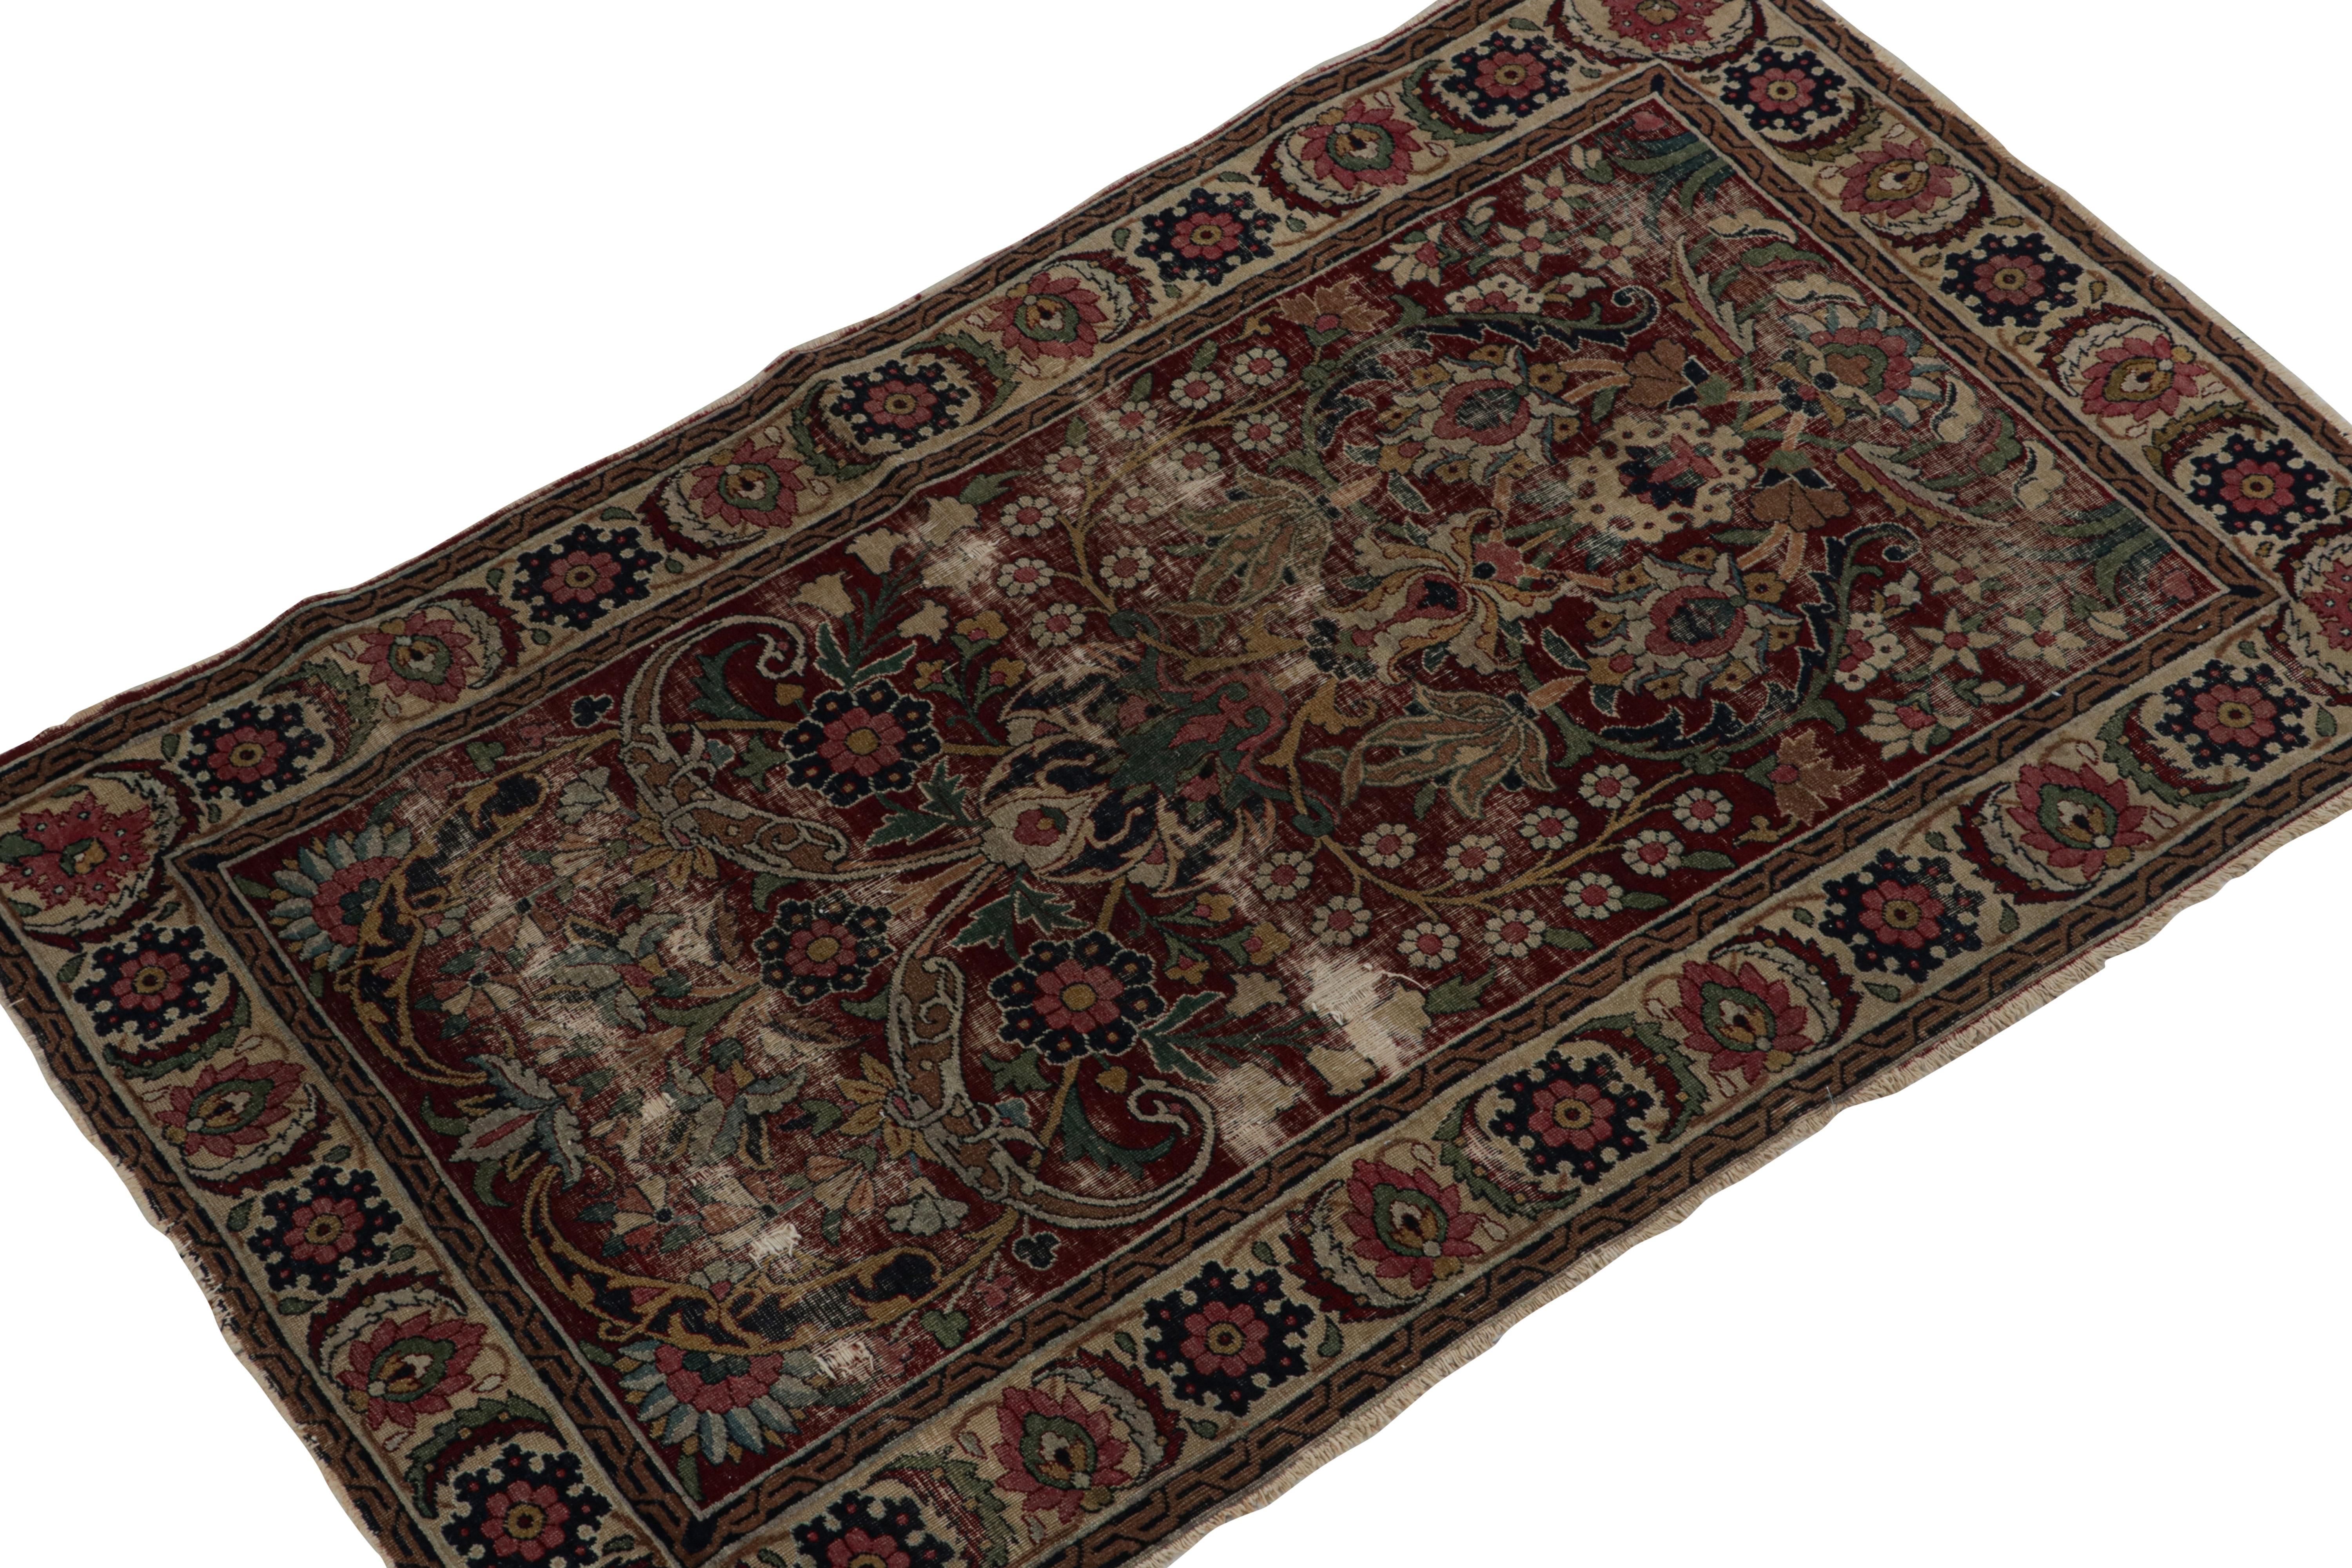 Hand-knotted in wool circa 1890-1900, this 3x4 antique Khorassan rug is a collectible piece from the Persian curations by Rug & Kilim. 

On the Design: 

This scatter rug enjoys a rich burgundy field, and dense floral patterns with especially